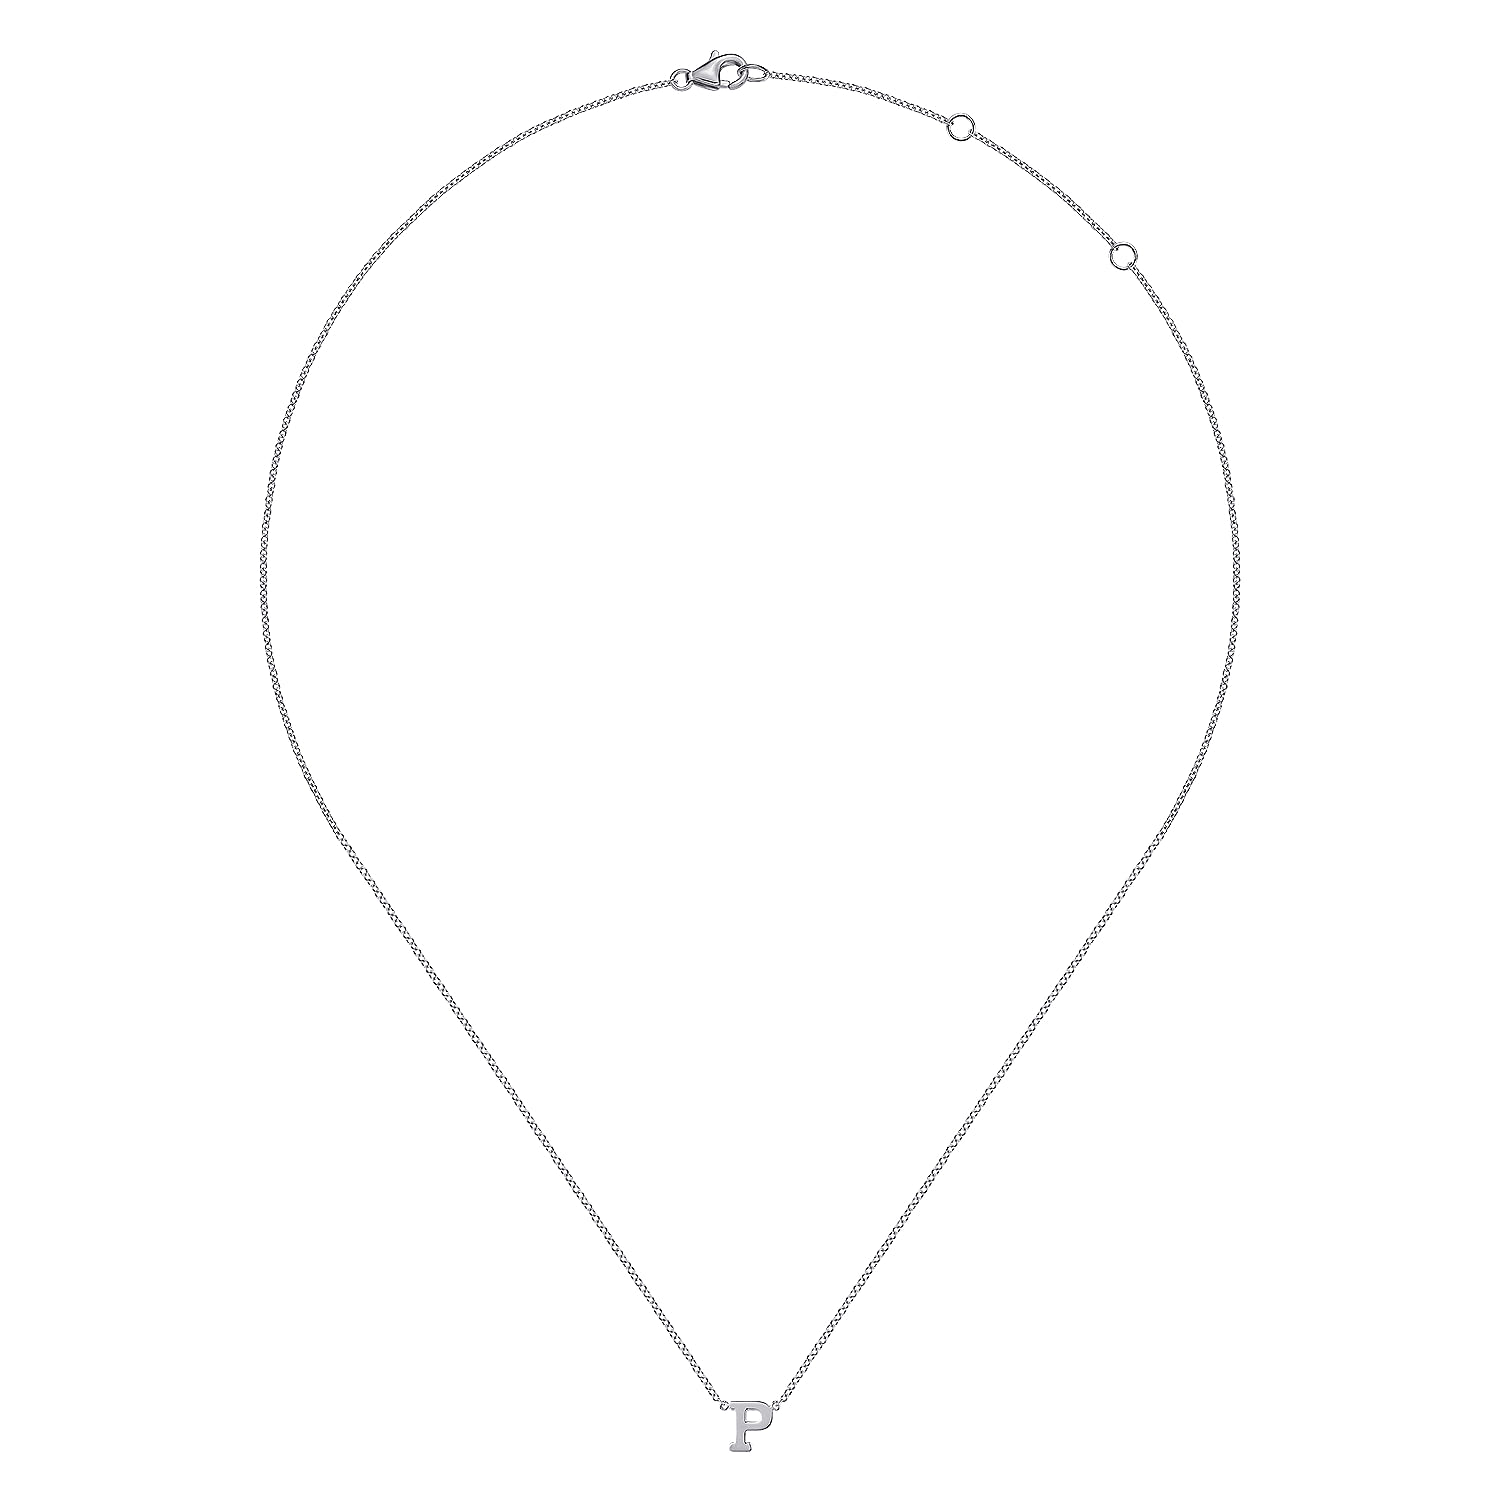 14K White Gold P Initial Necklace